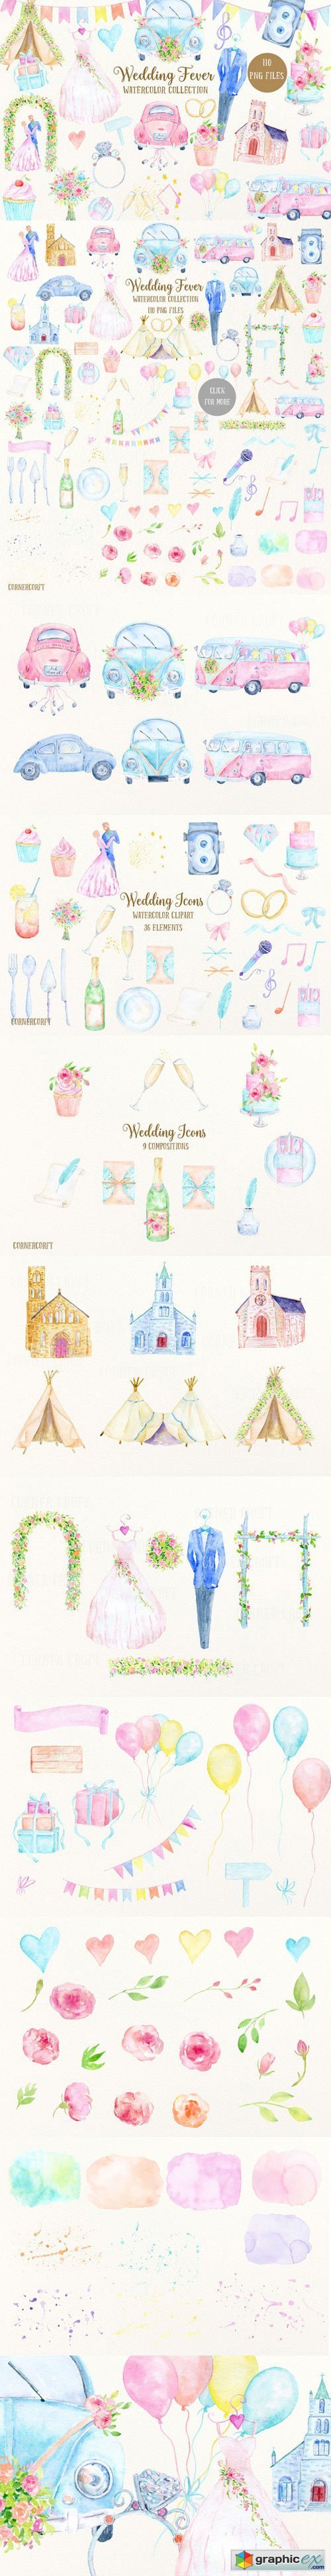 Watercolor Collection Wedding Fever